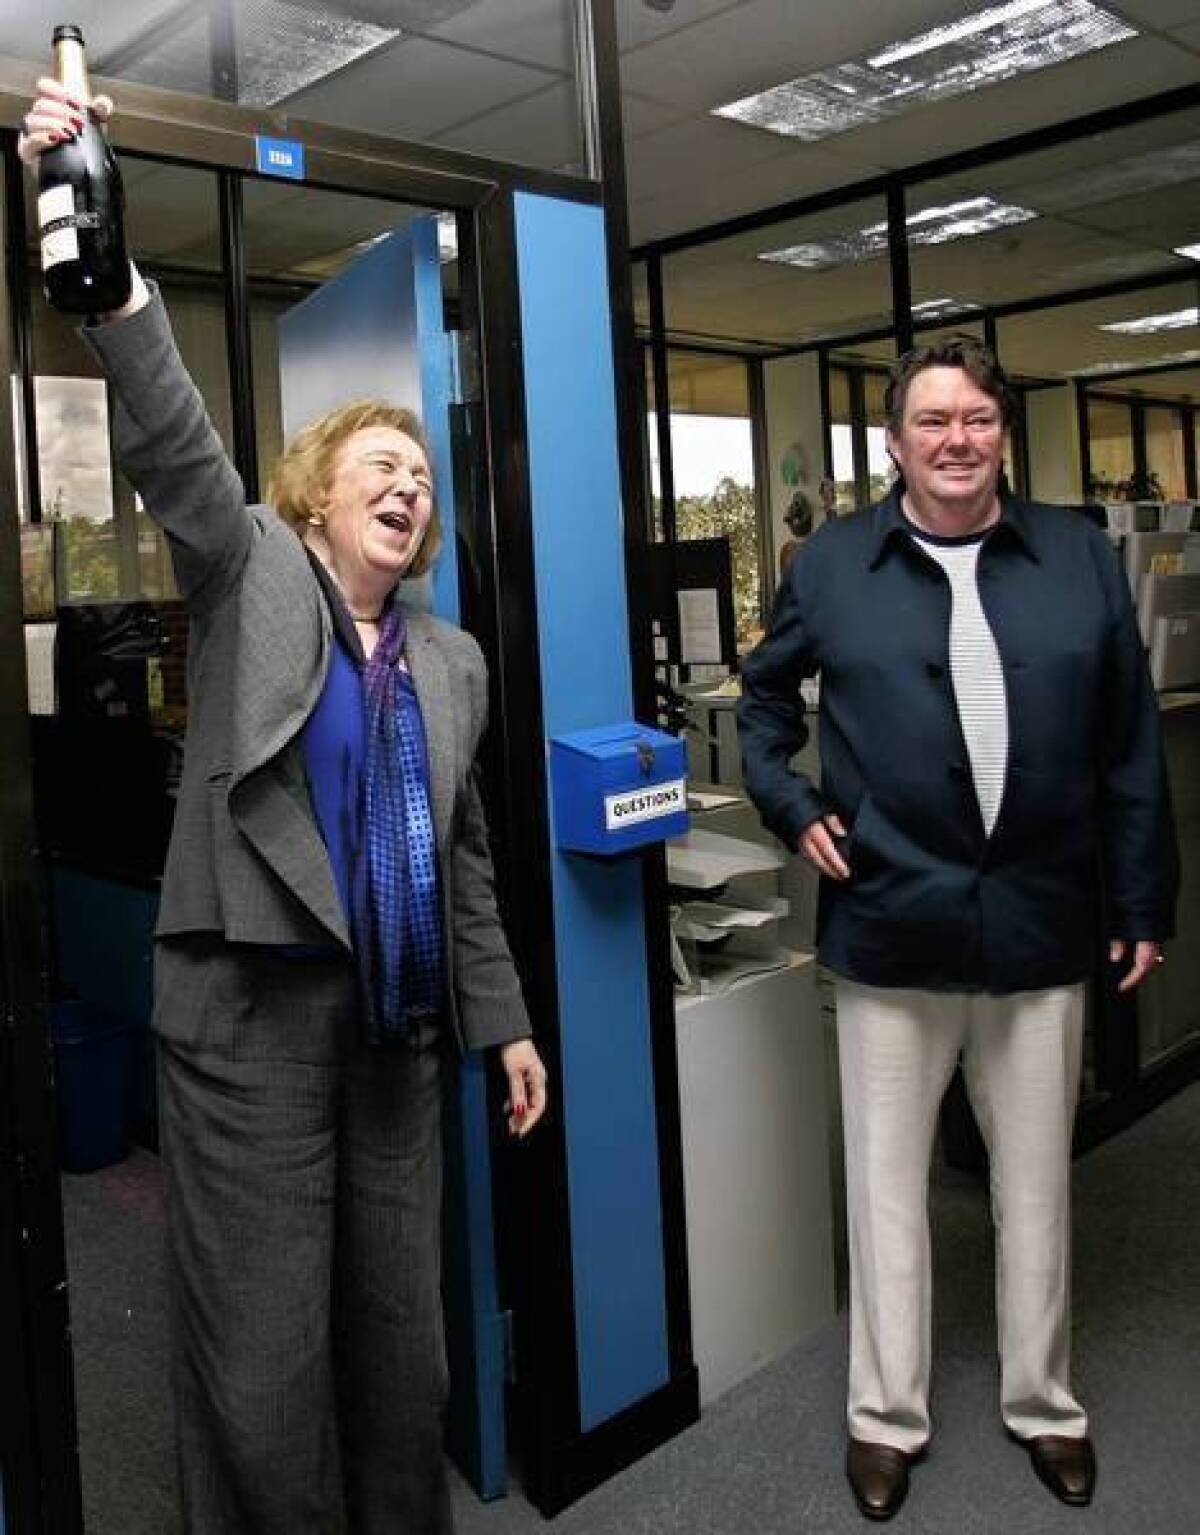 San Diego Union-Tribune publisher David Copley, right, and editor Karin Winner celebrate the newspaper’s 2006 Pulitzer Prize for national reporting.